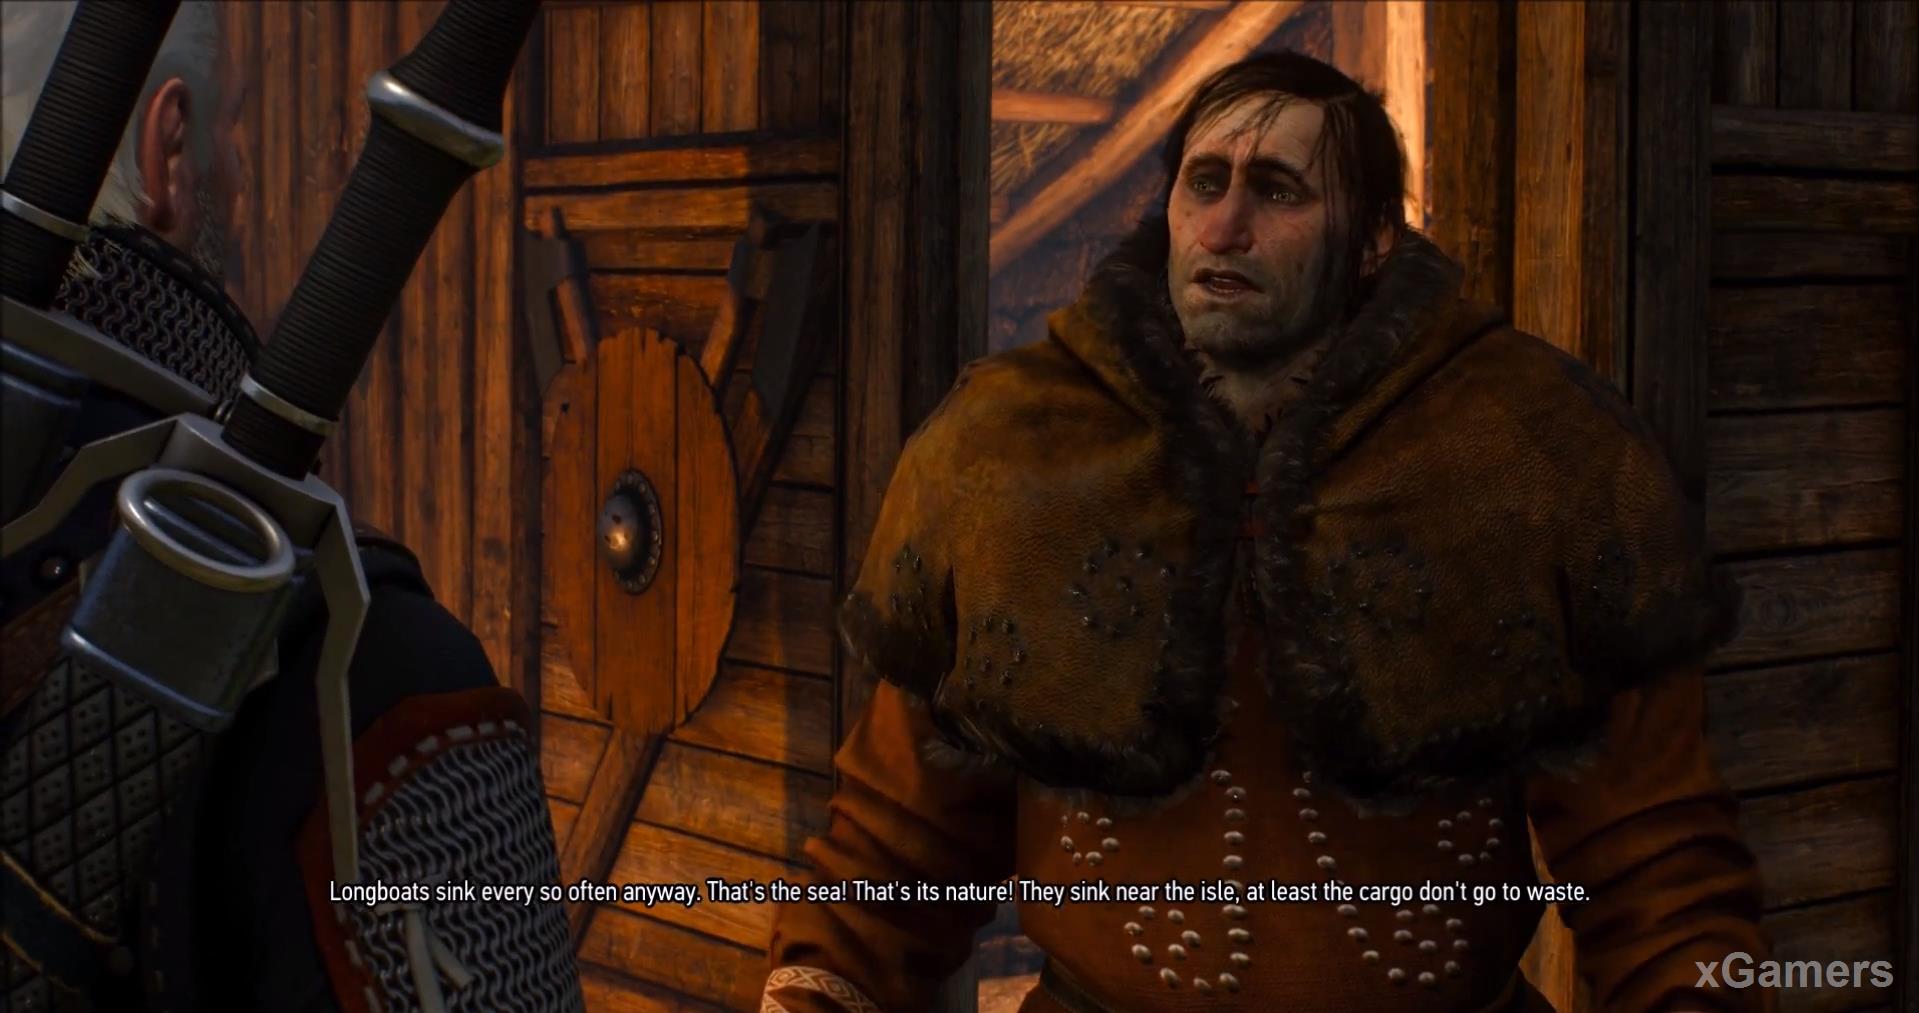 Geralt will tell about his findings and tell the reason for the appearance of ghosts.